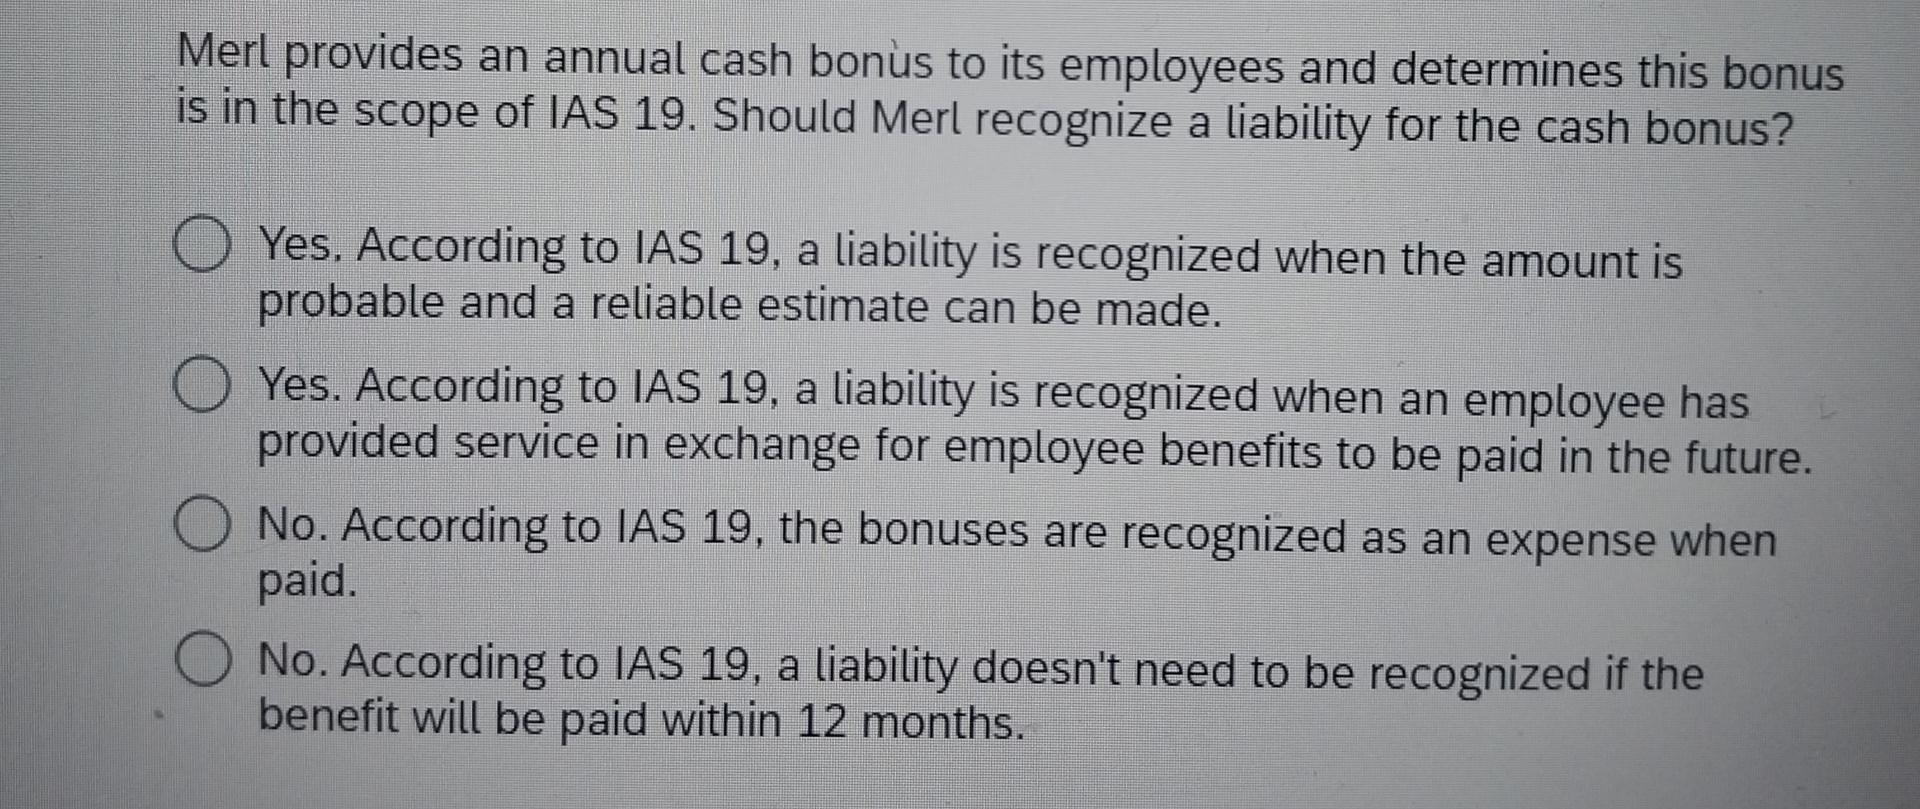 Merl provides an annual cash bons to its employees and determines this bonus is in the scope of IAS 19.